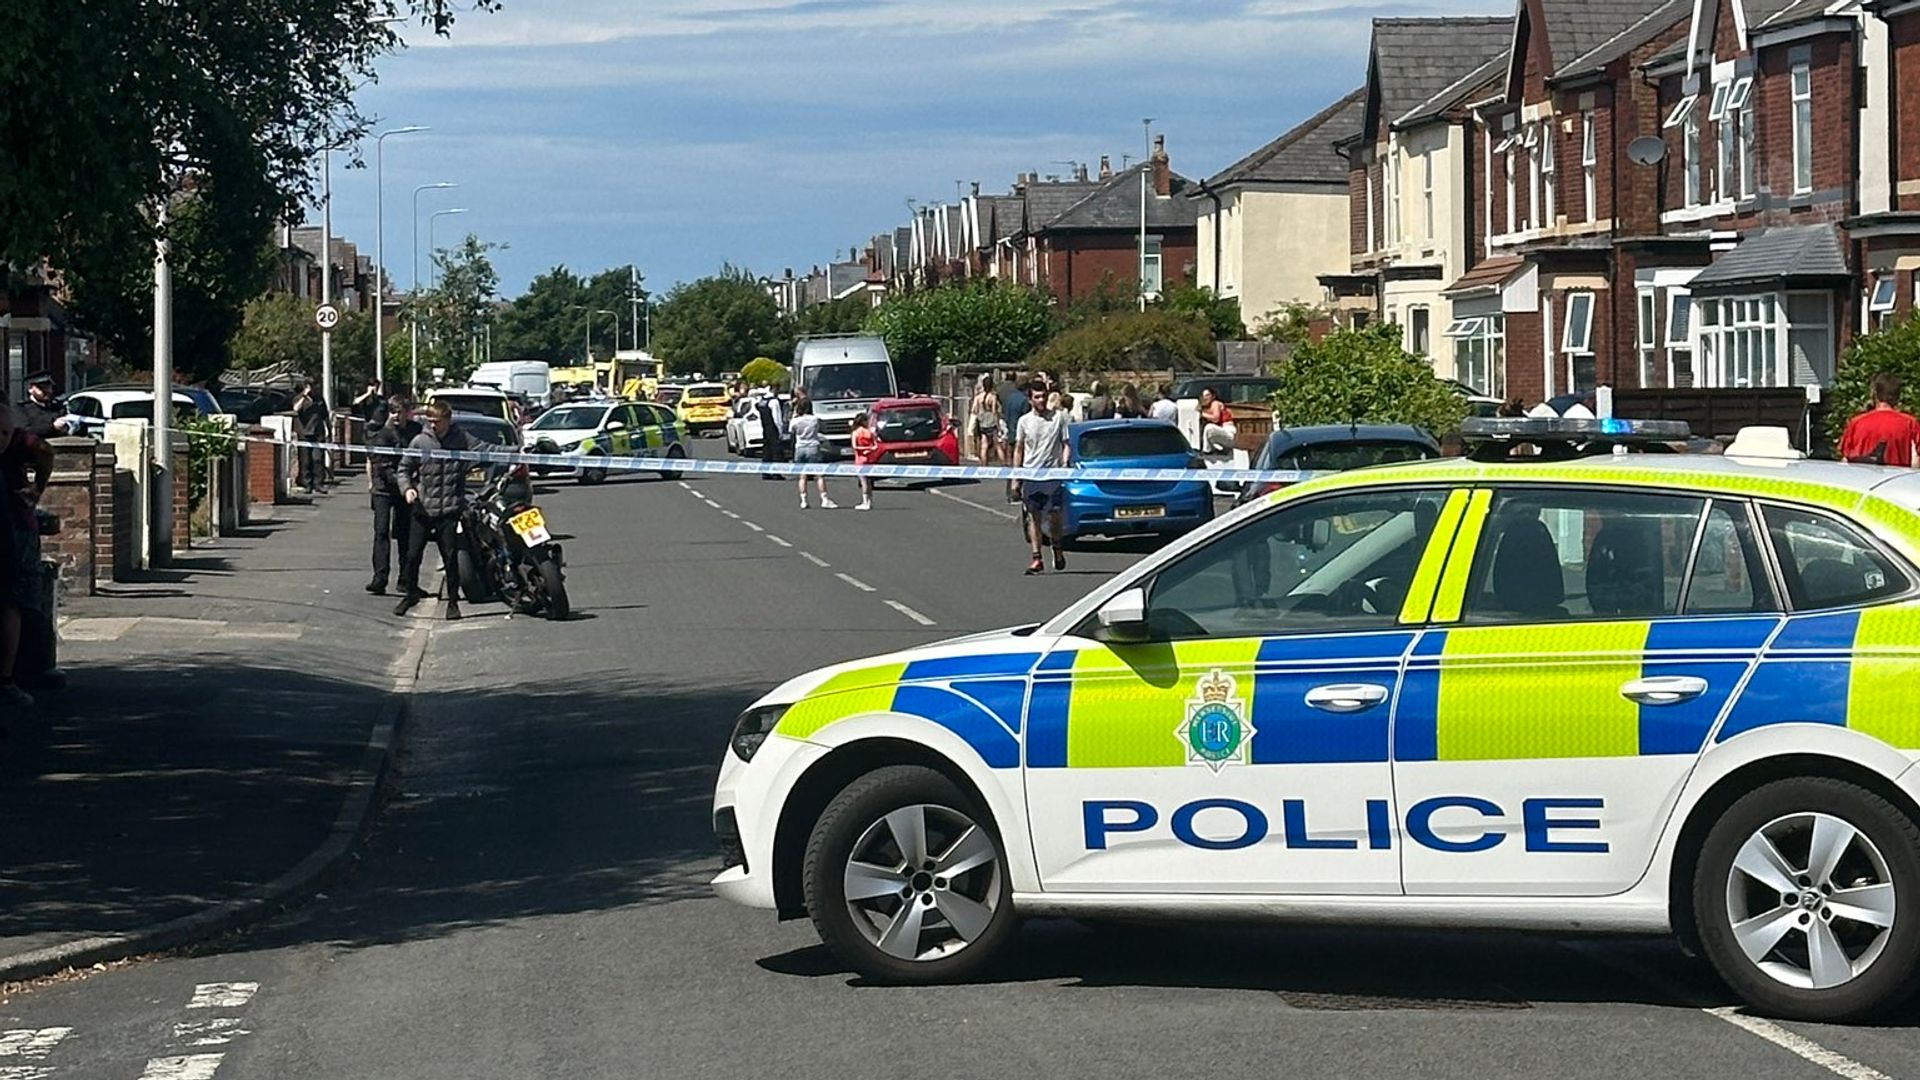 'A scene from a horror movie': Major incident declared after multiple stabbings